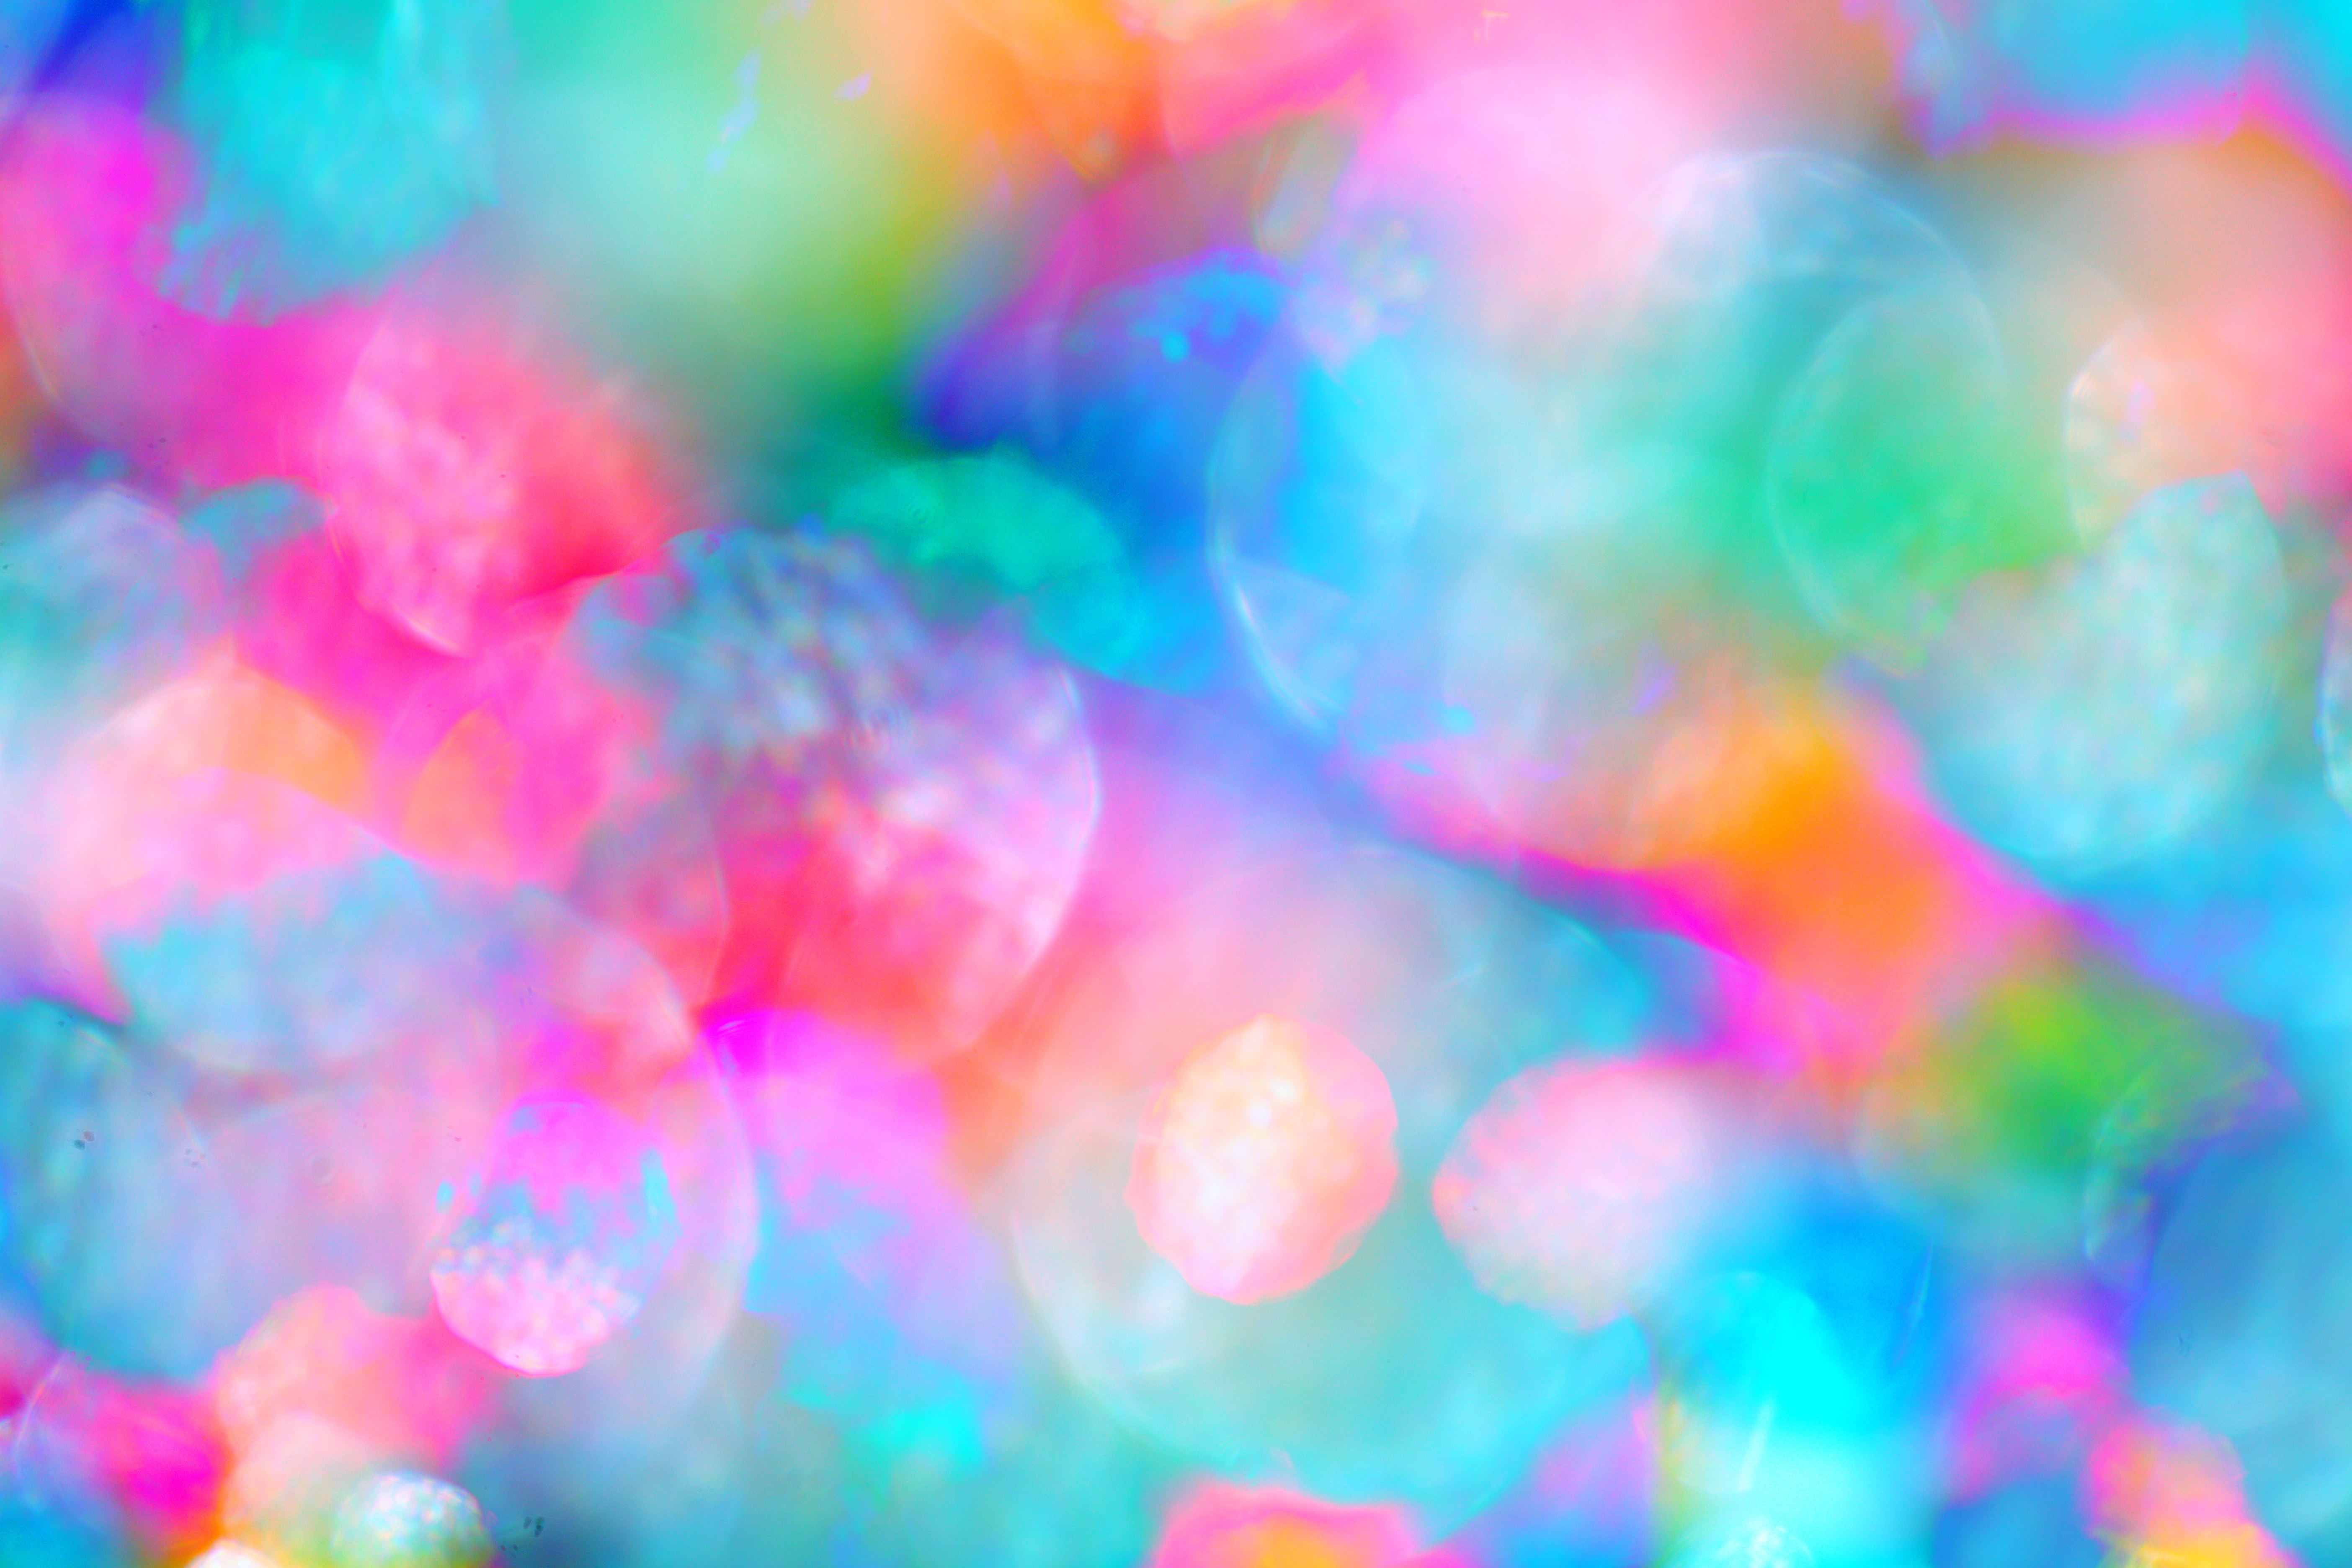 motley, multicolored, abstract, blur, smooth, stains, spots Desktop Wallpaper